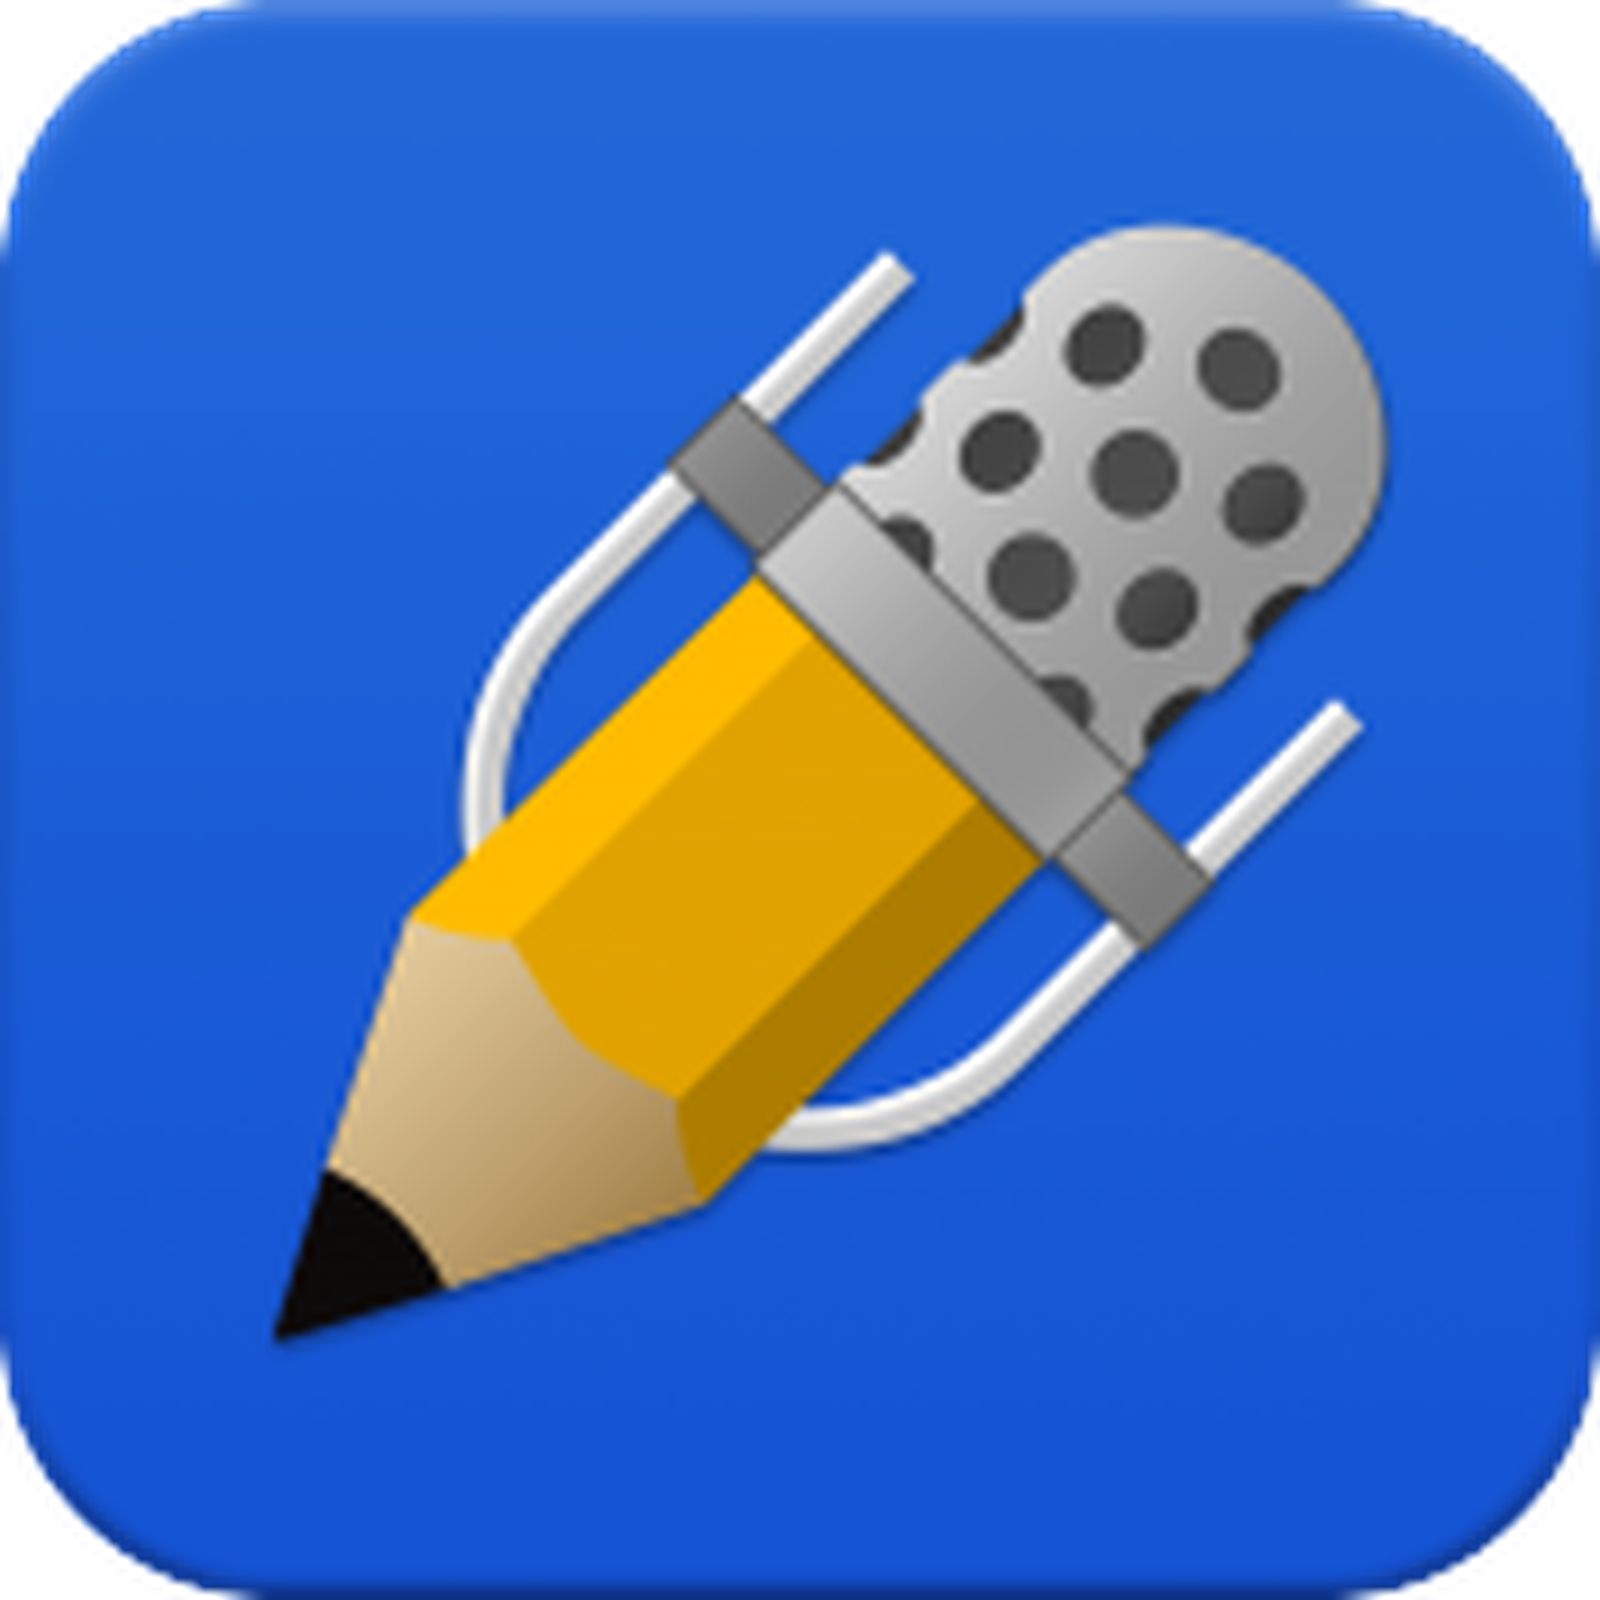 notability app for mac review